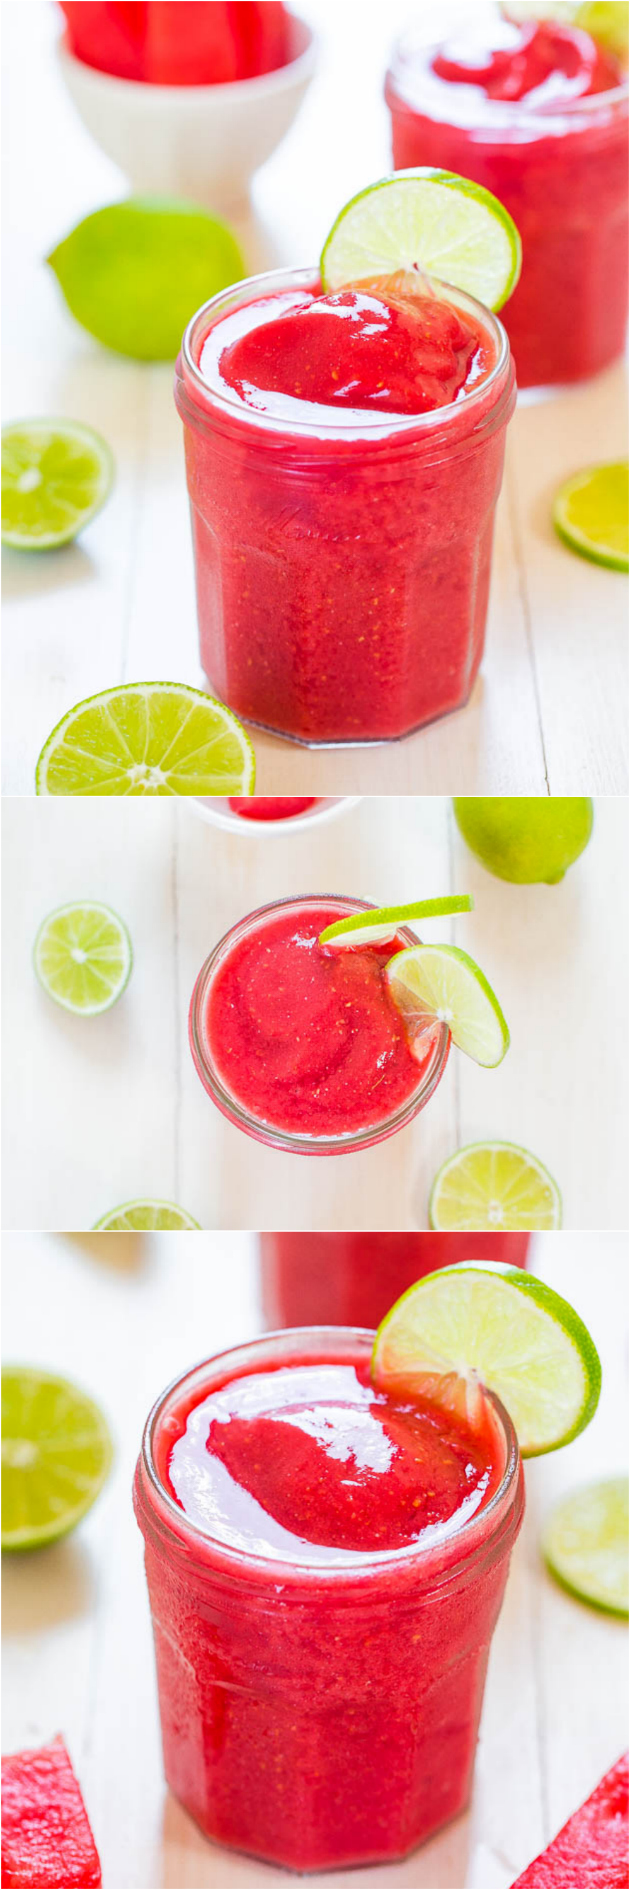 Watermelon Raspberry Slushies - Summertime in a glass! Cool, refreshing, and you'll want a refill before you know it!